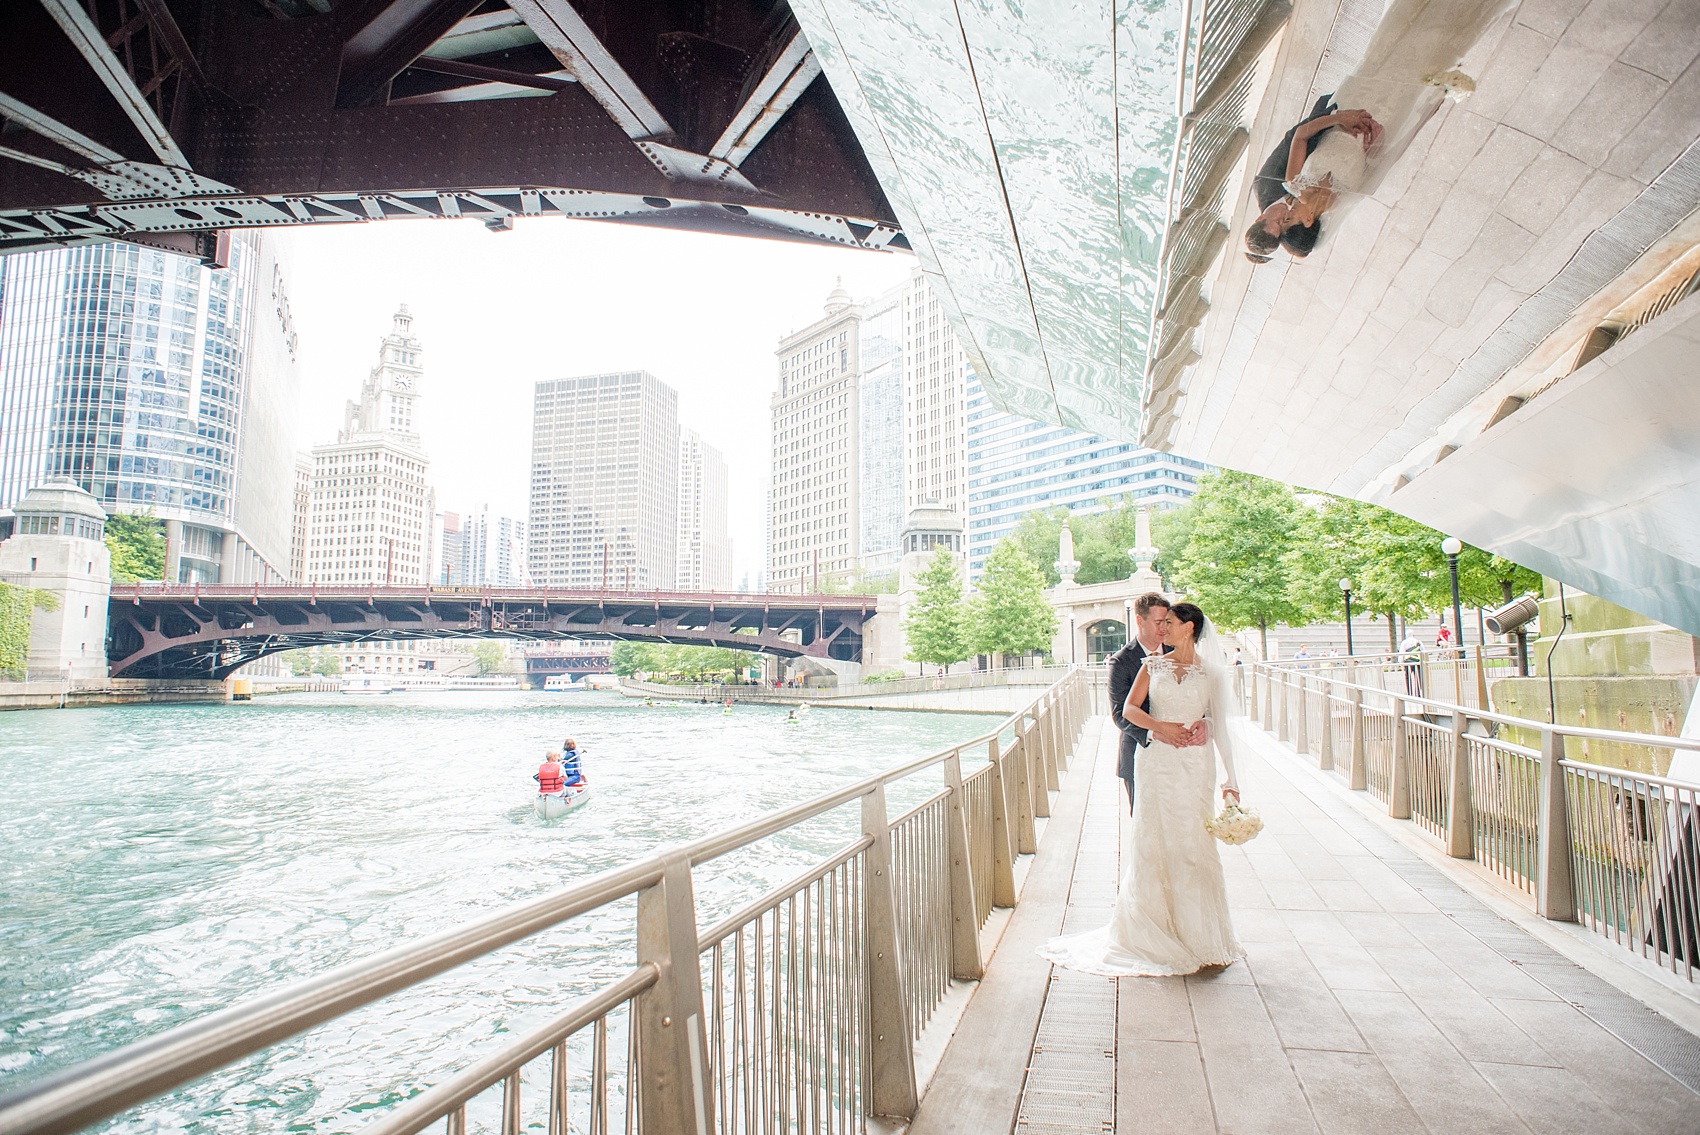 Mikkel Paige Photography photos of a wedding in downtown Chicago at The Rookery. The bride and groom took photos by the waterfront and Riverwalk.